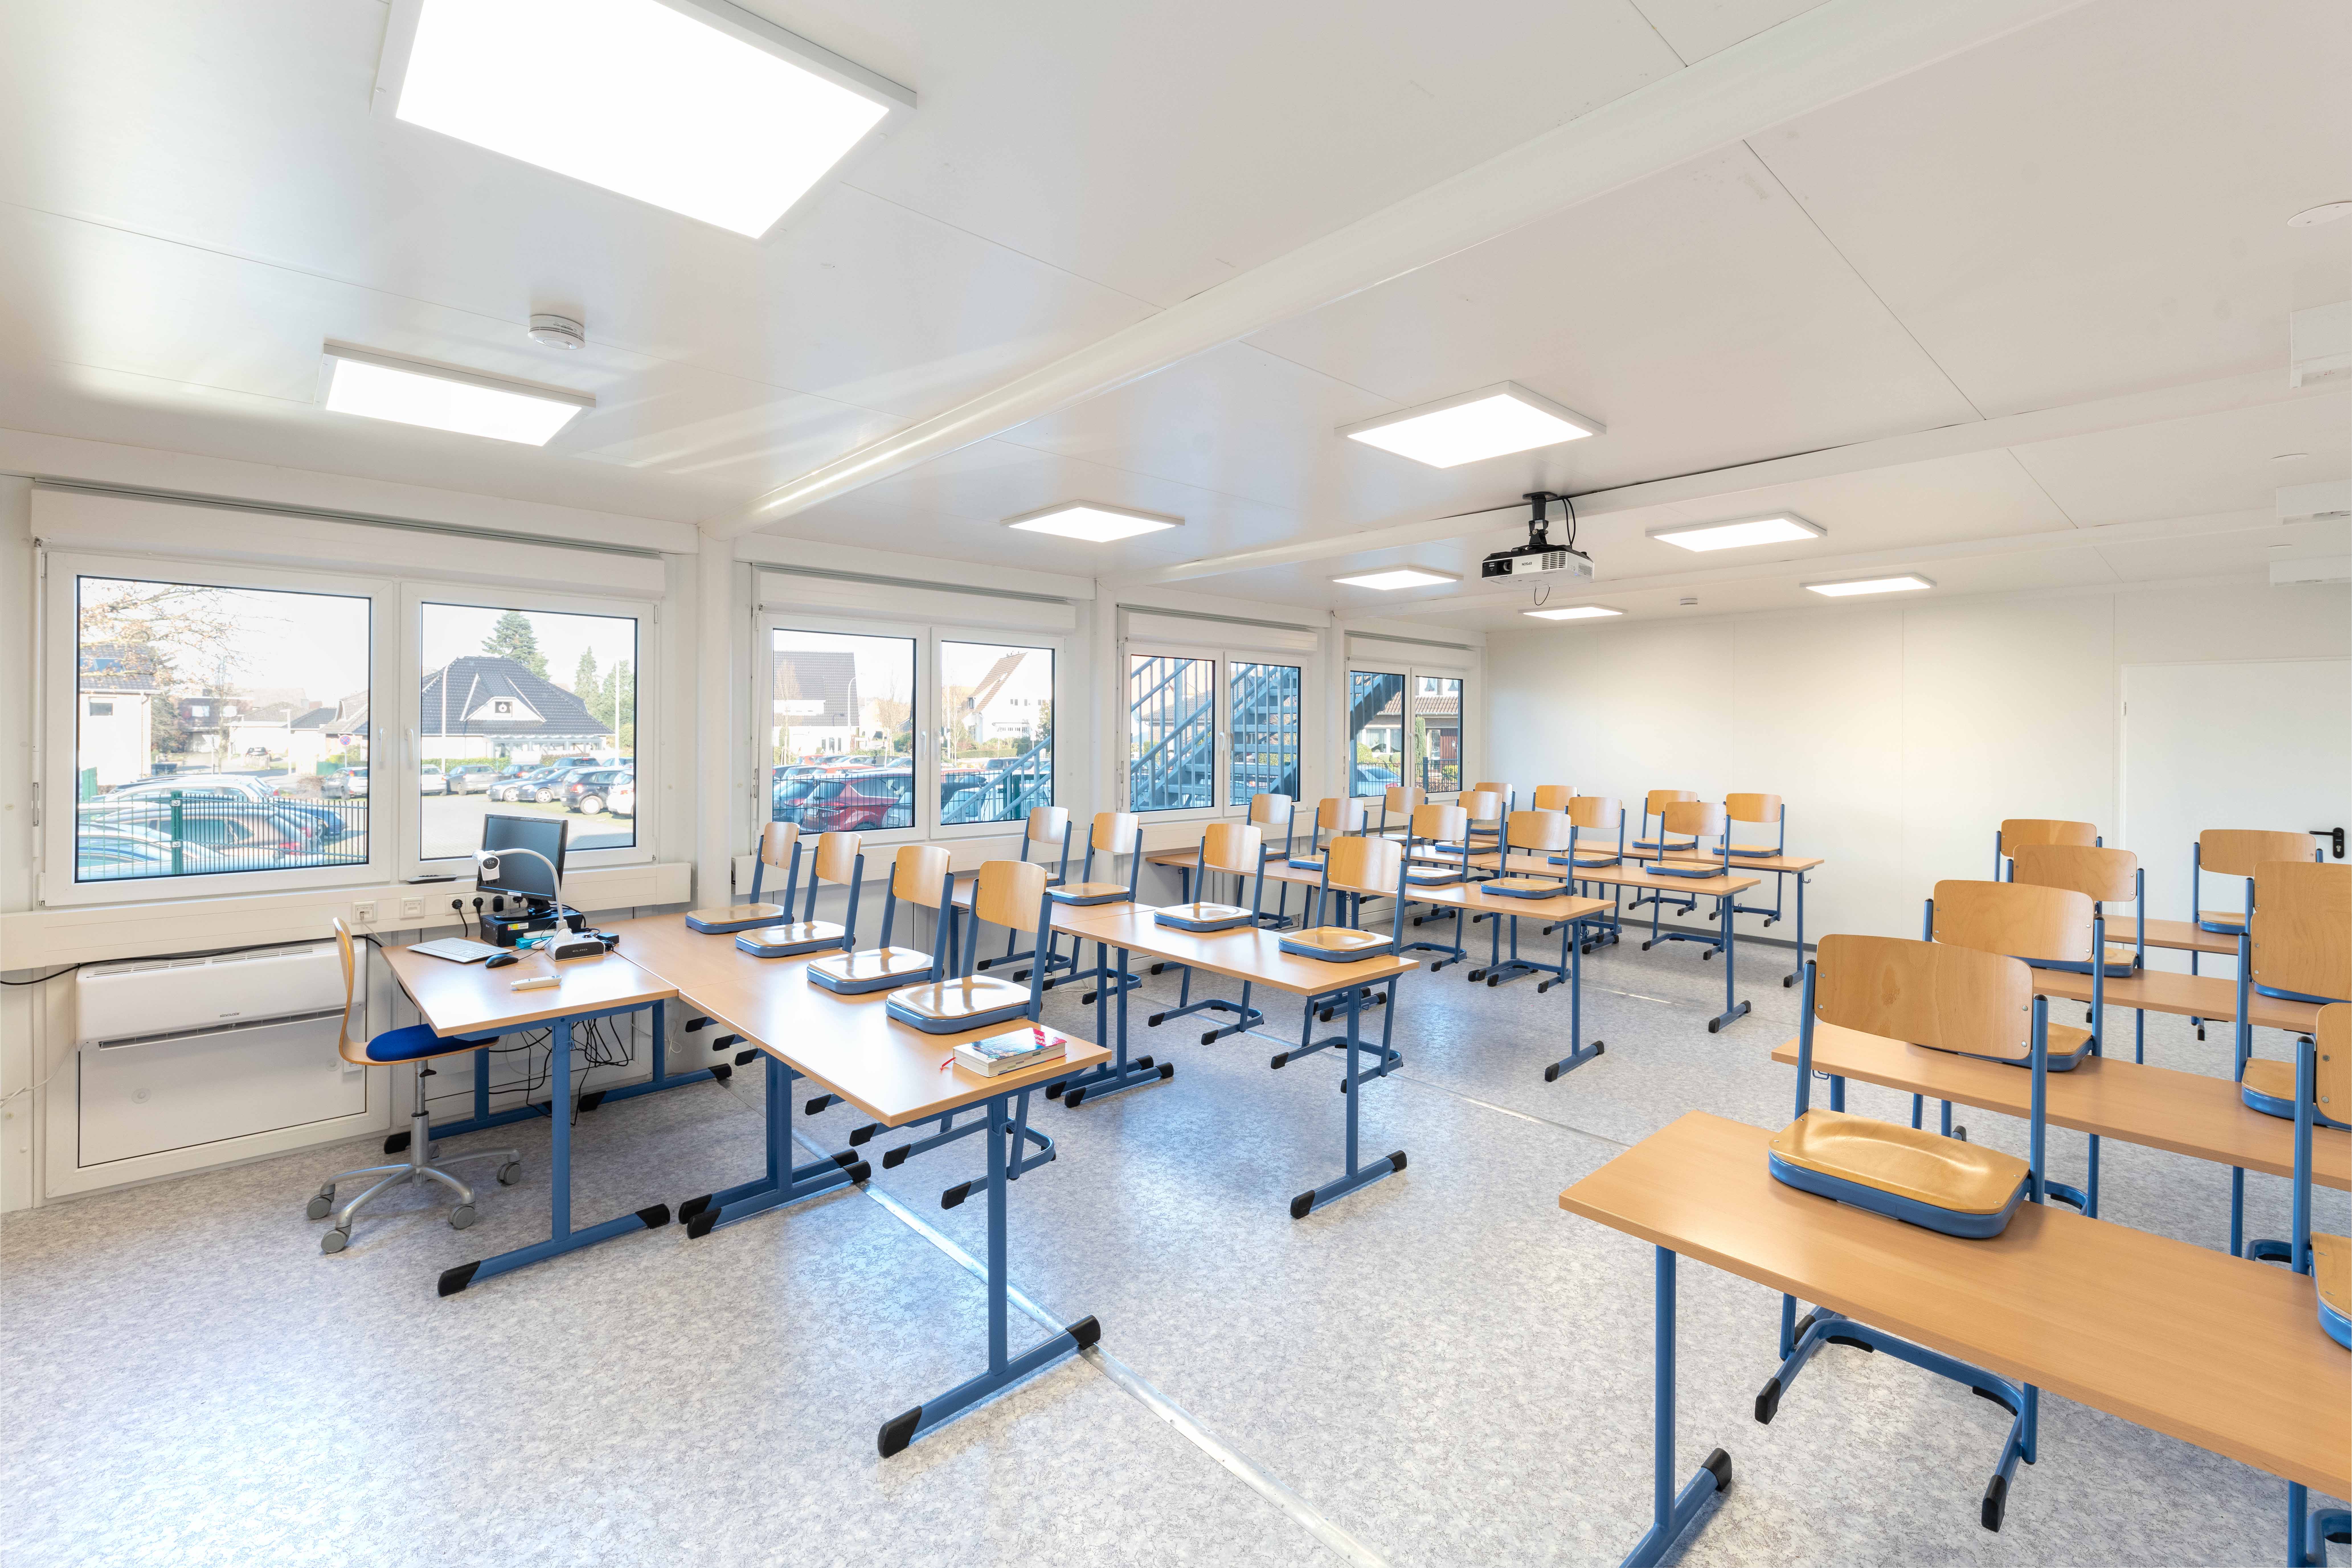 The classrooms can accommodate about 30 pupils.